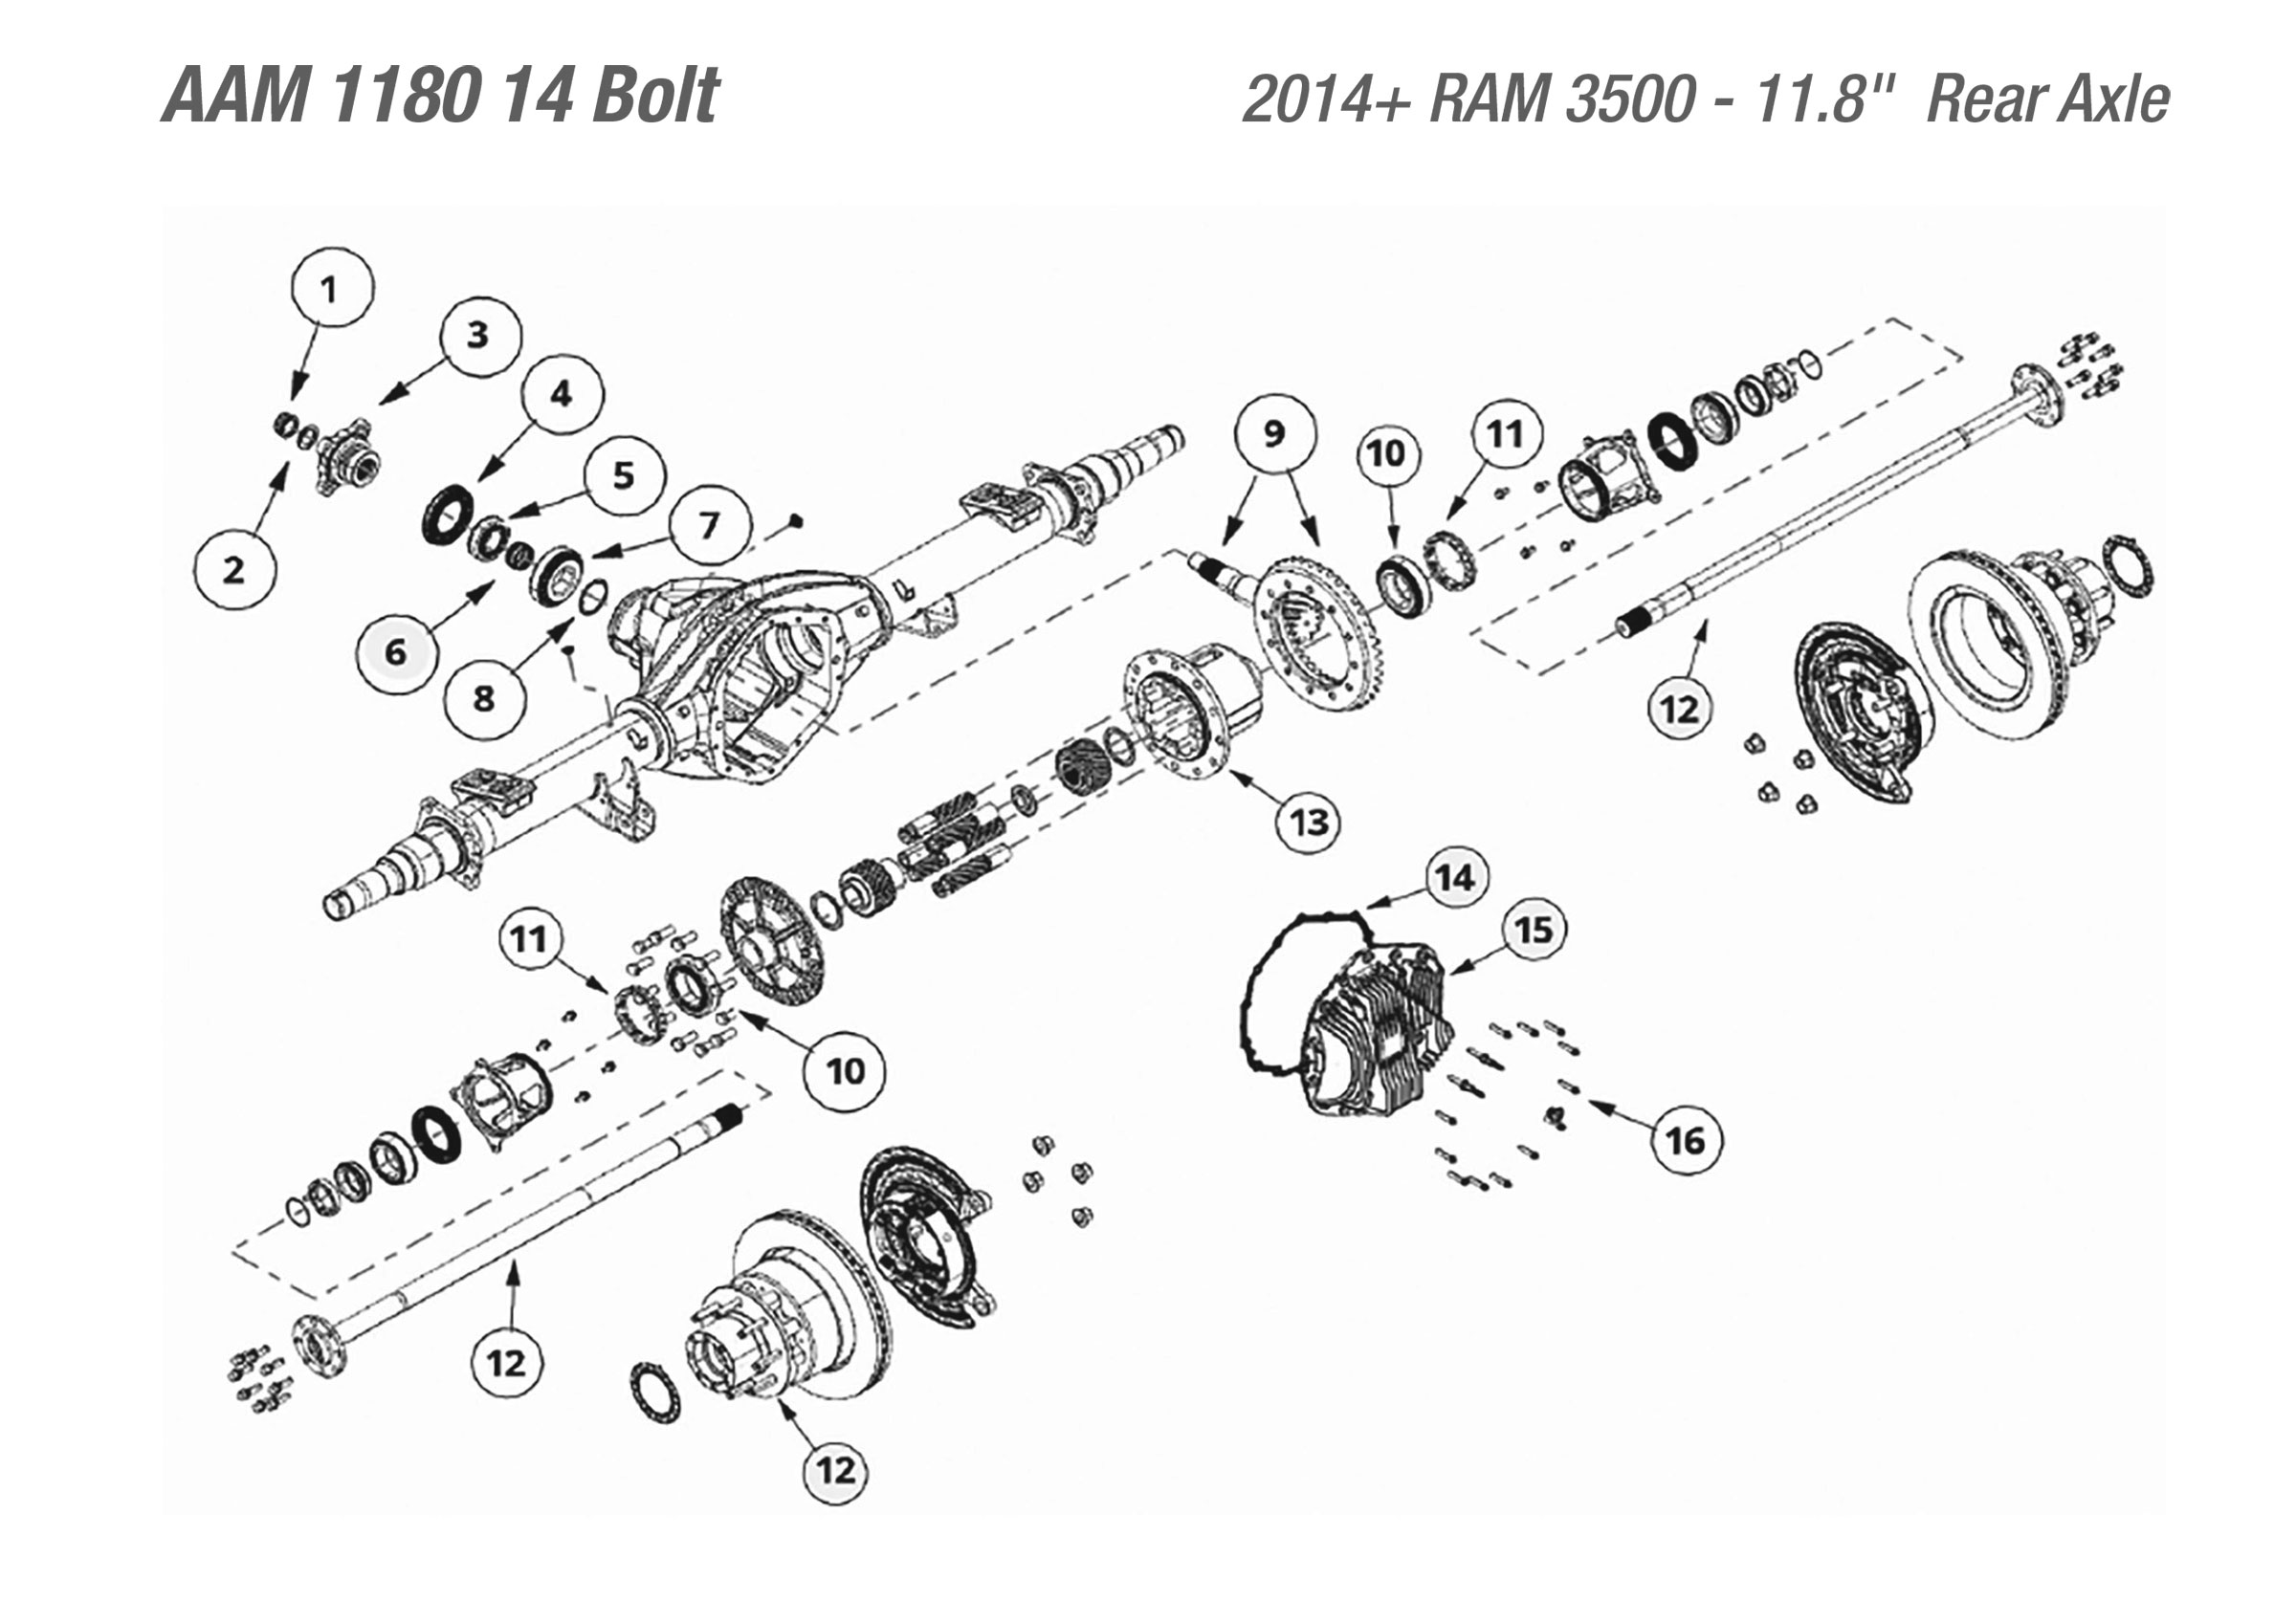 AAM 11.8 Rear Axle Exploded view